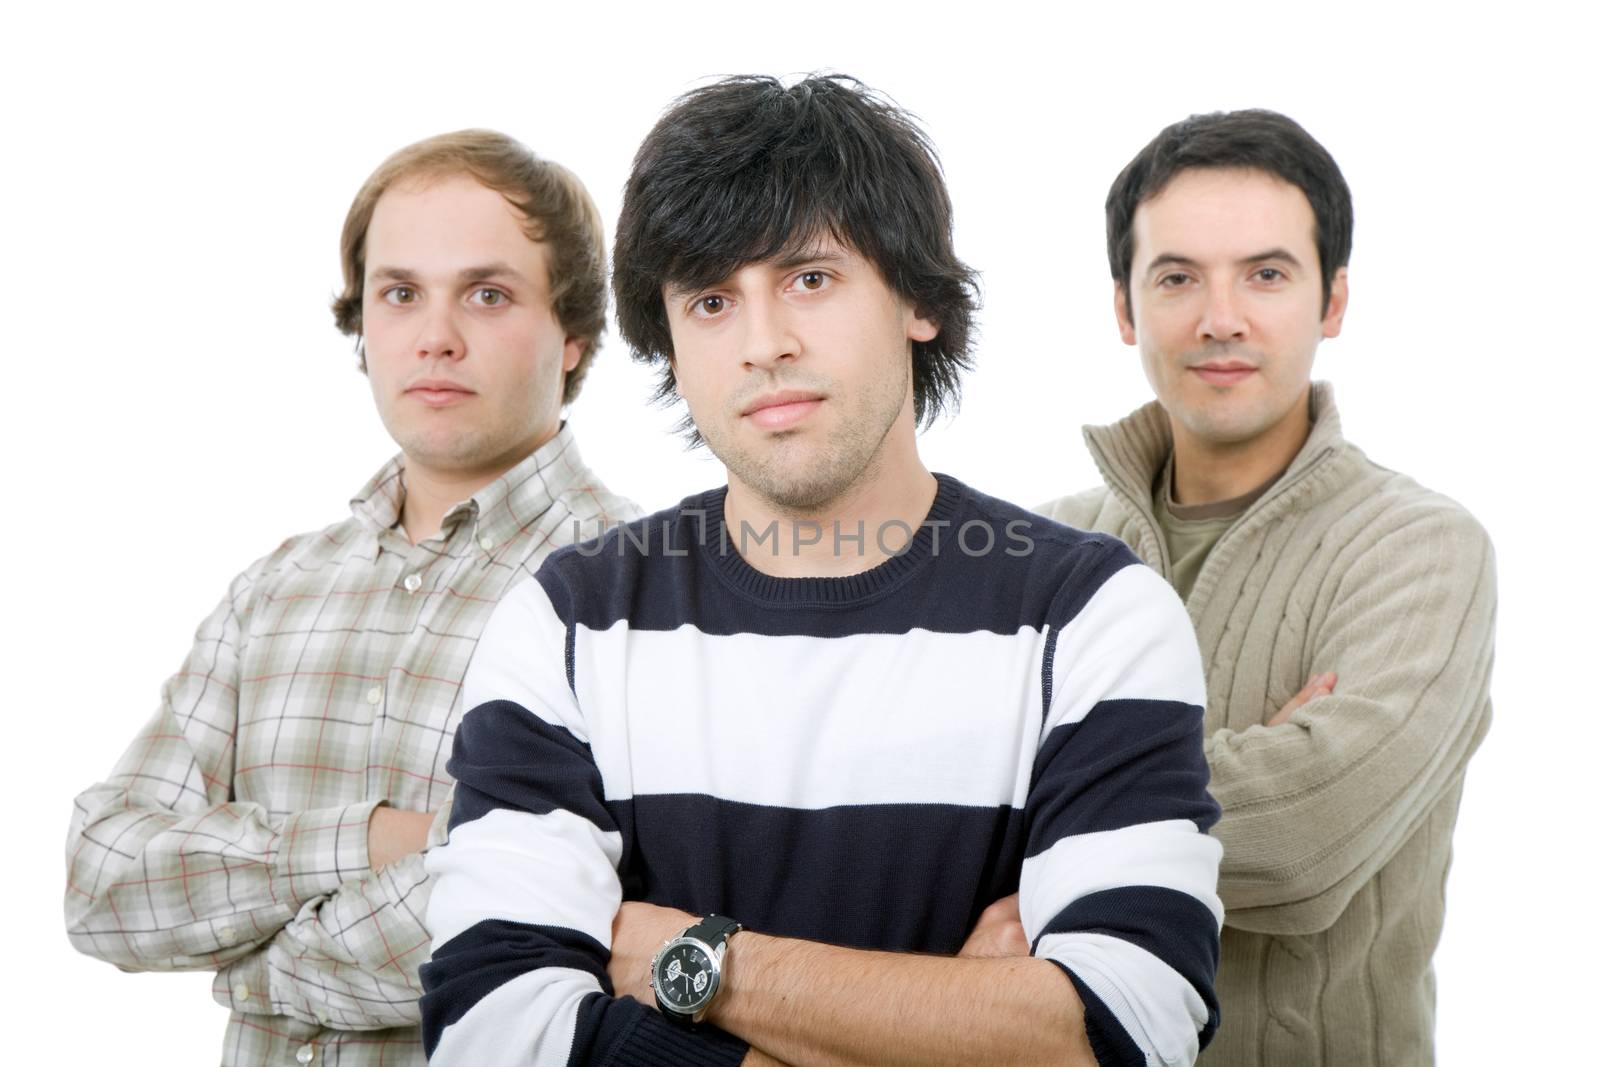 three casual men isolated on white background